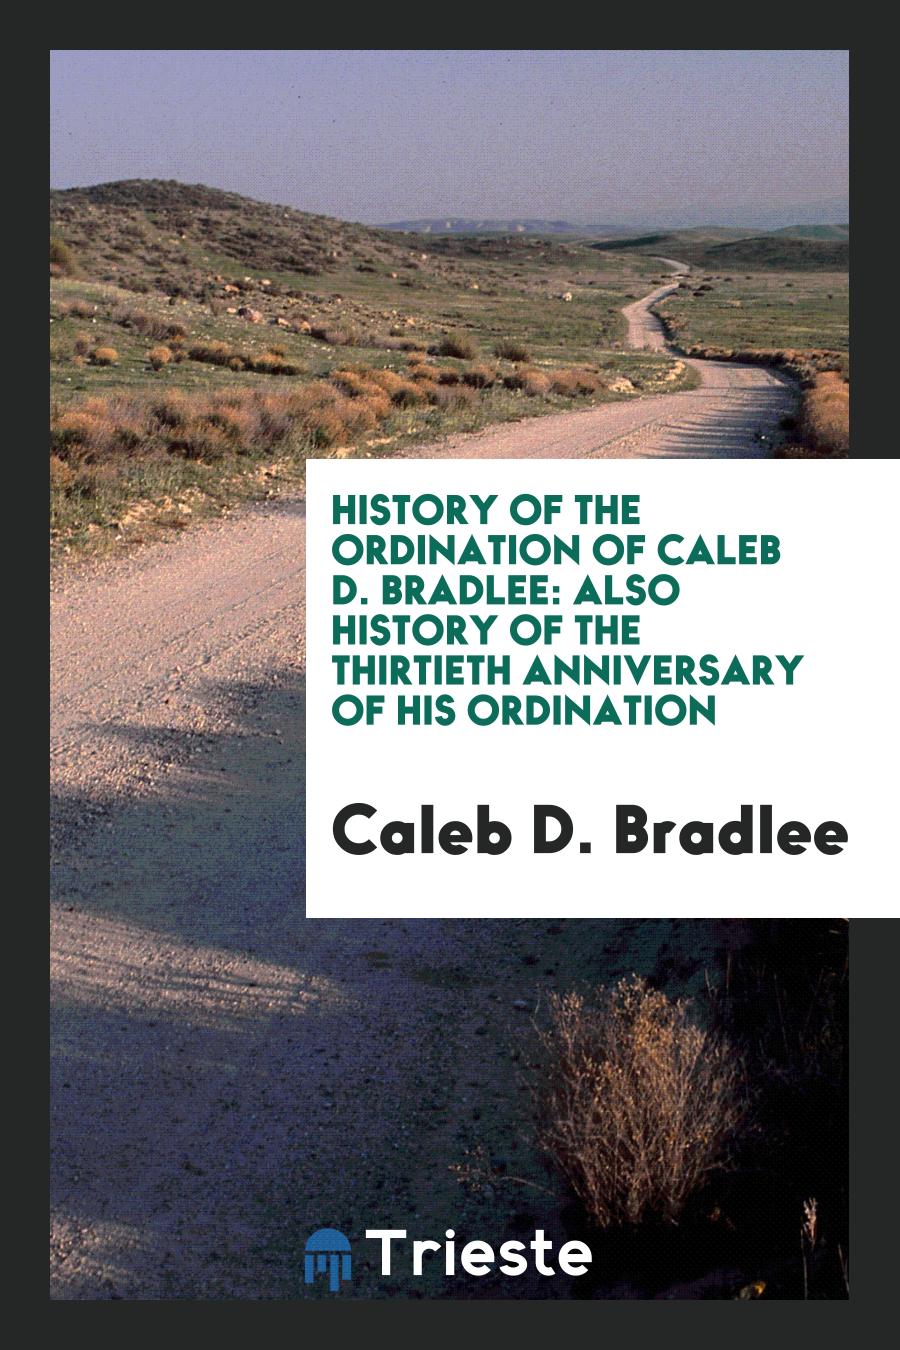 History of the Ordination of Caleb D. Bradlee: Also History of the Thirtieth Anniversary of His Ordination